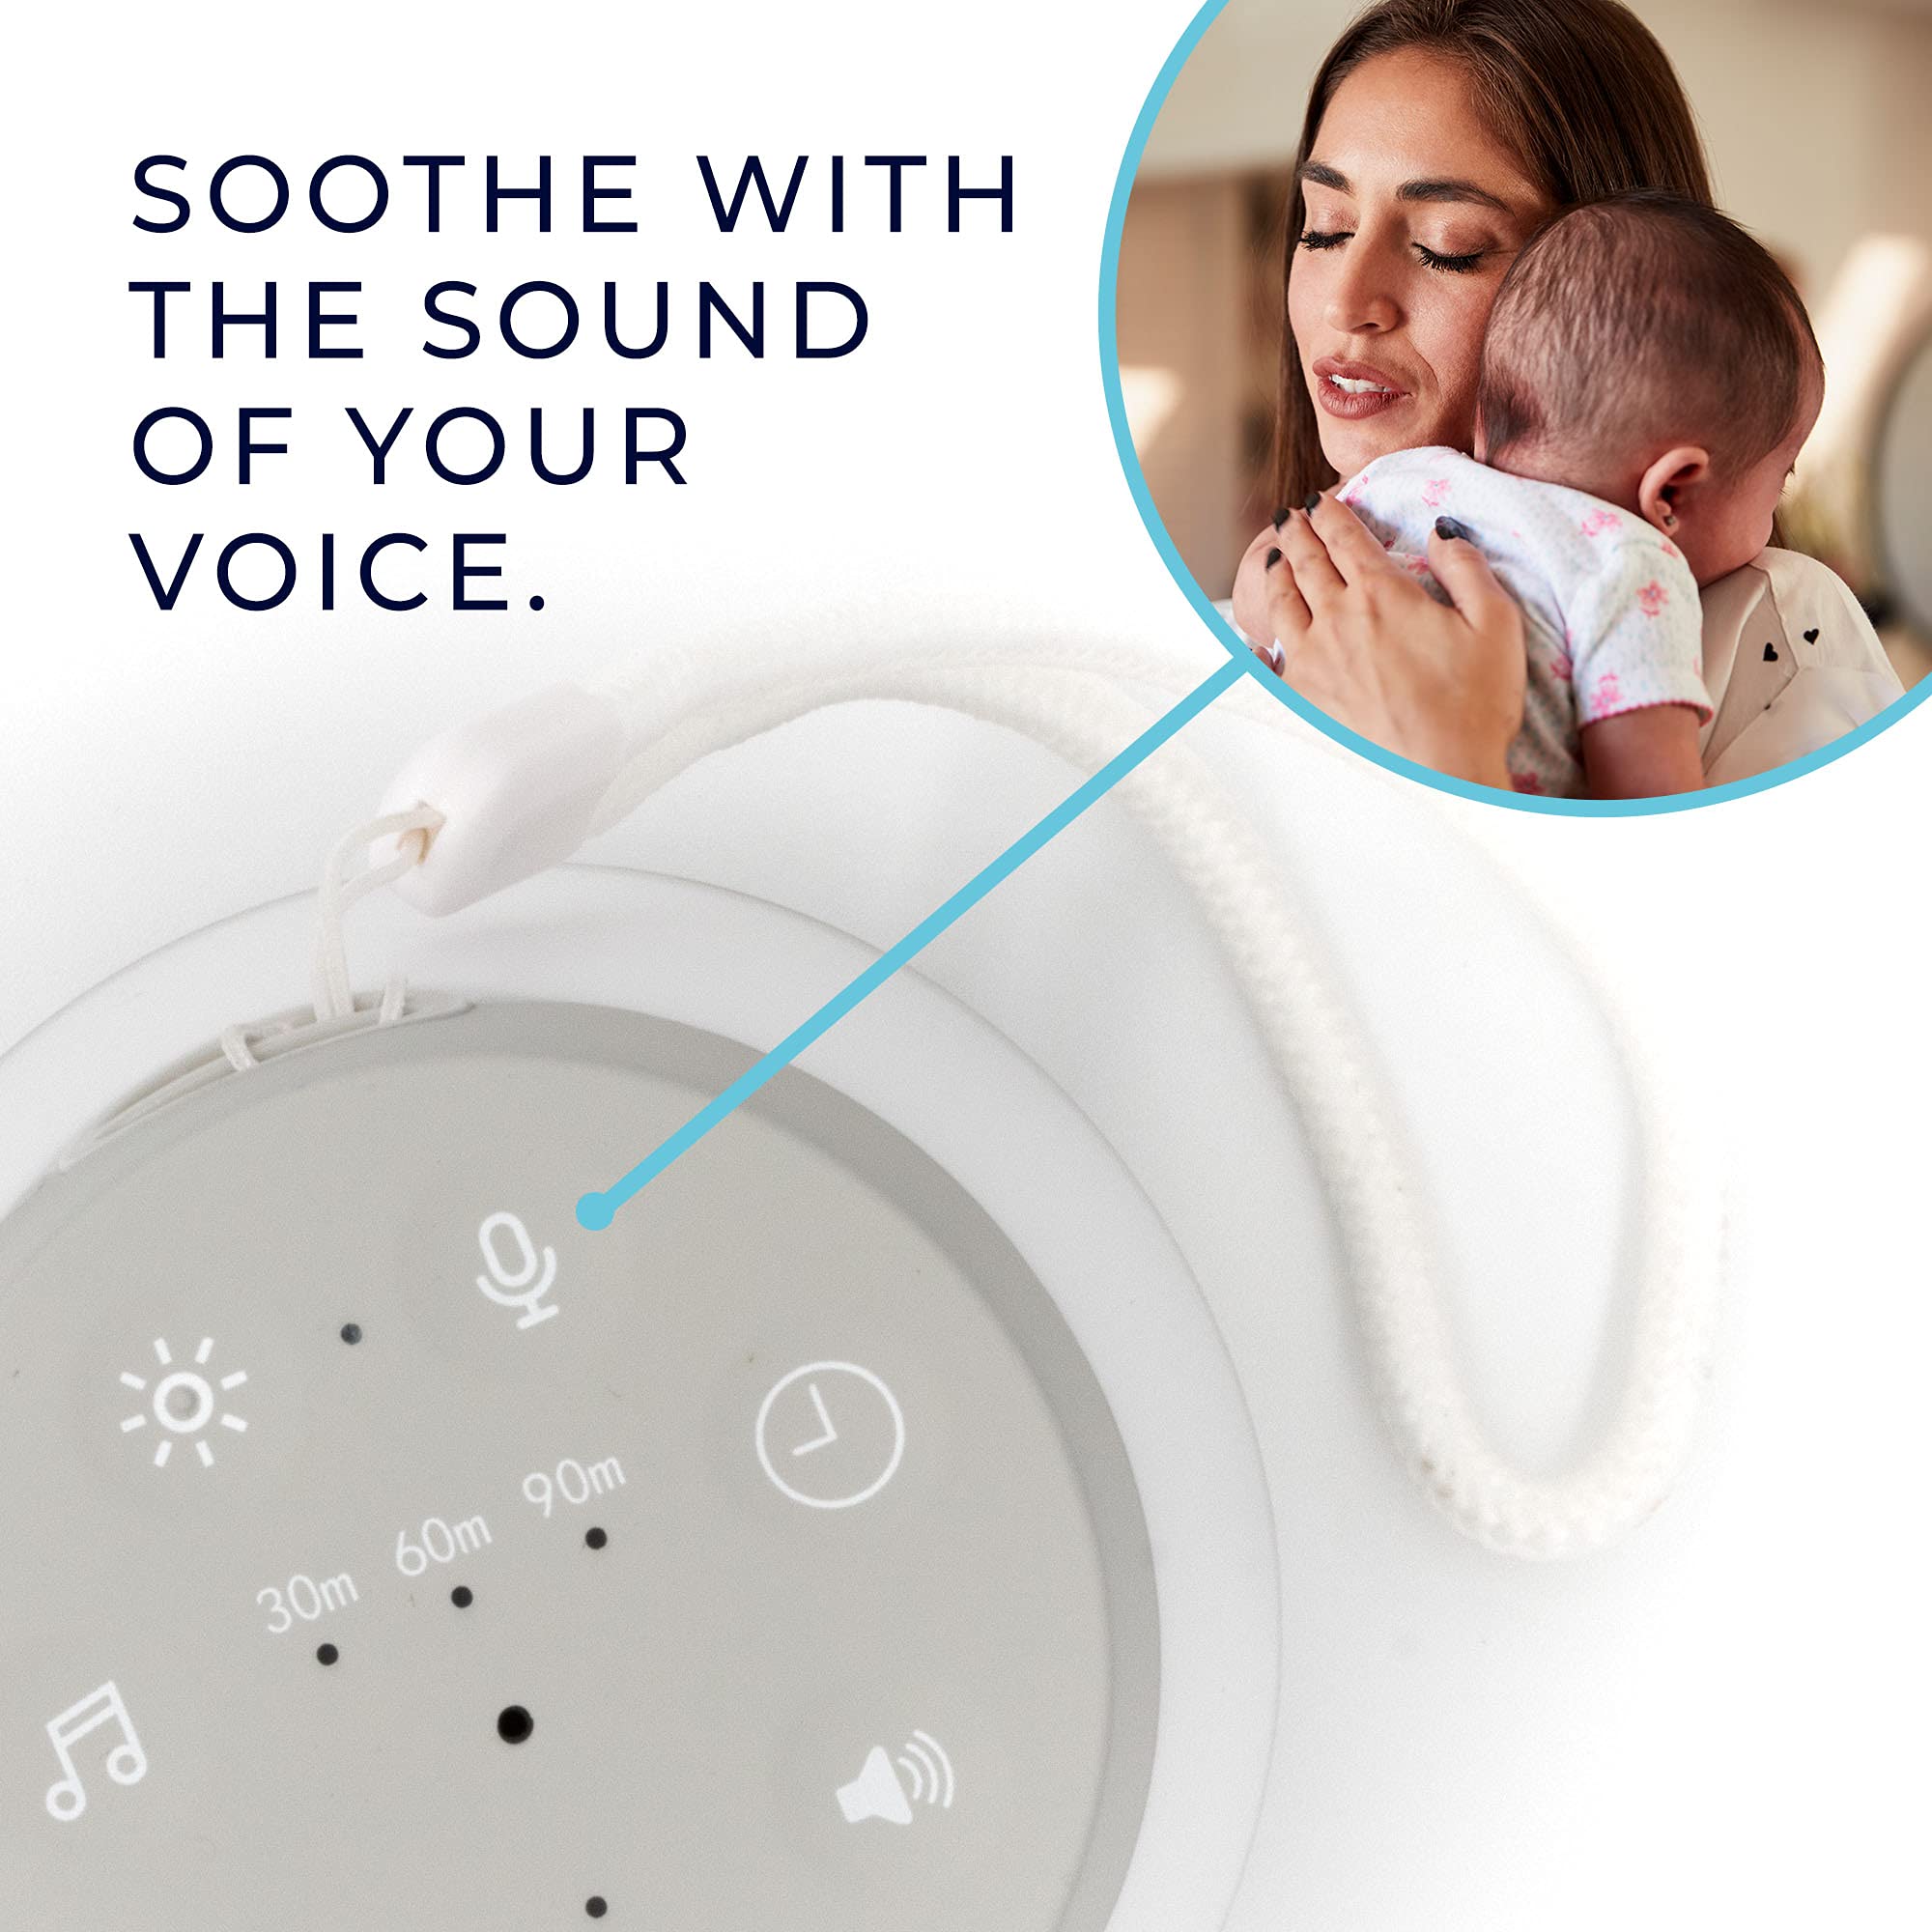 Yogasleep Baby Soother White Noise Sound Machine & Night Light, with Voice Recording & 5 Sound Options Including Brown Noise, Nature Sounds & Lullabies, Noise Cancelling & Sleep Aid, Registry Gift